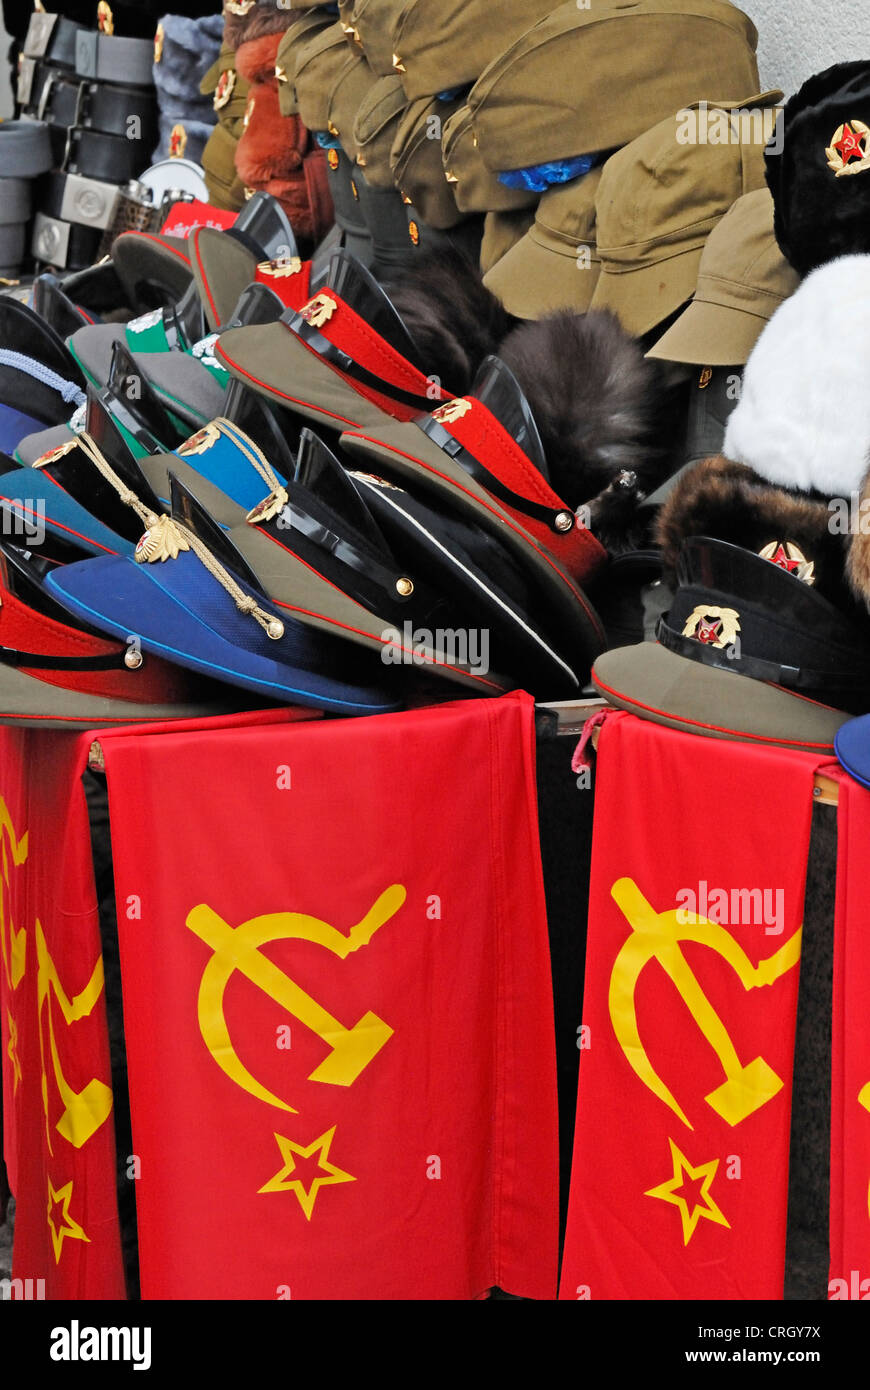 Berlin, Germany. Souvenir stall near Checkpoint Charlie selling Communist-themed souvenirs Stock Photo